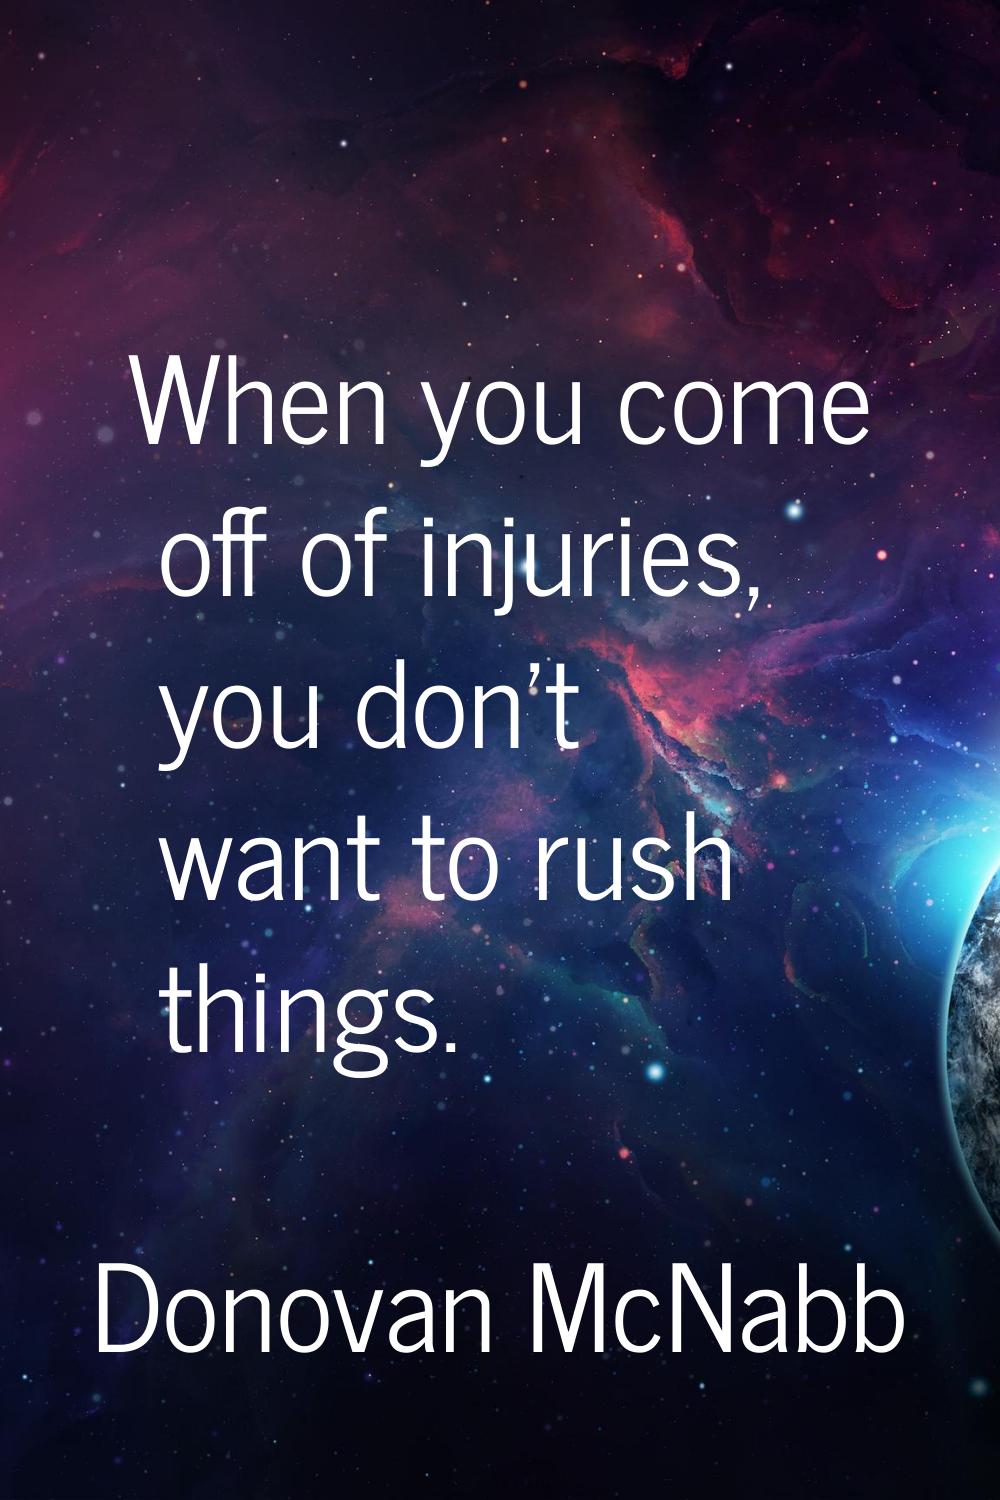 When you come off of injuries, you don't want to rush things.